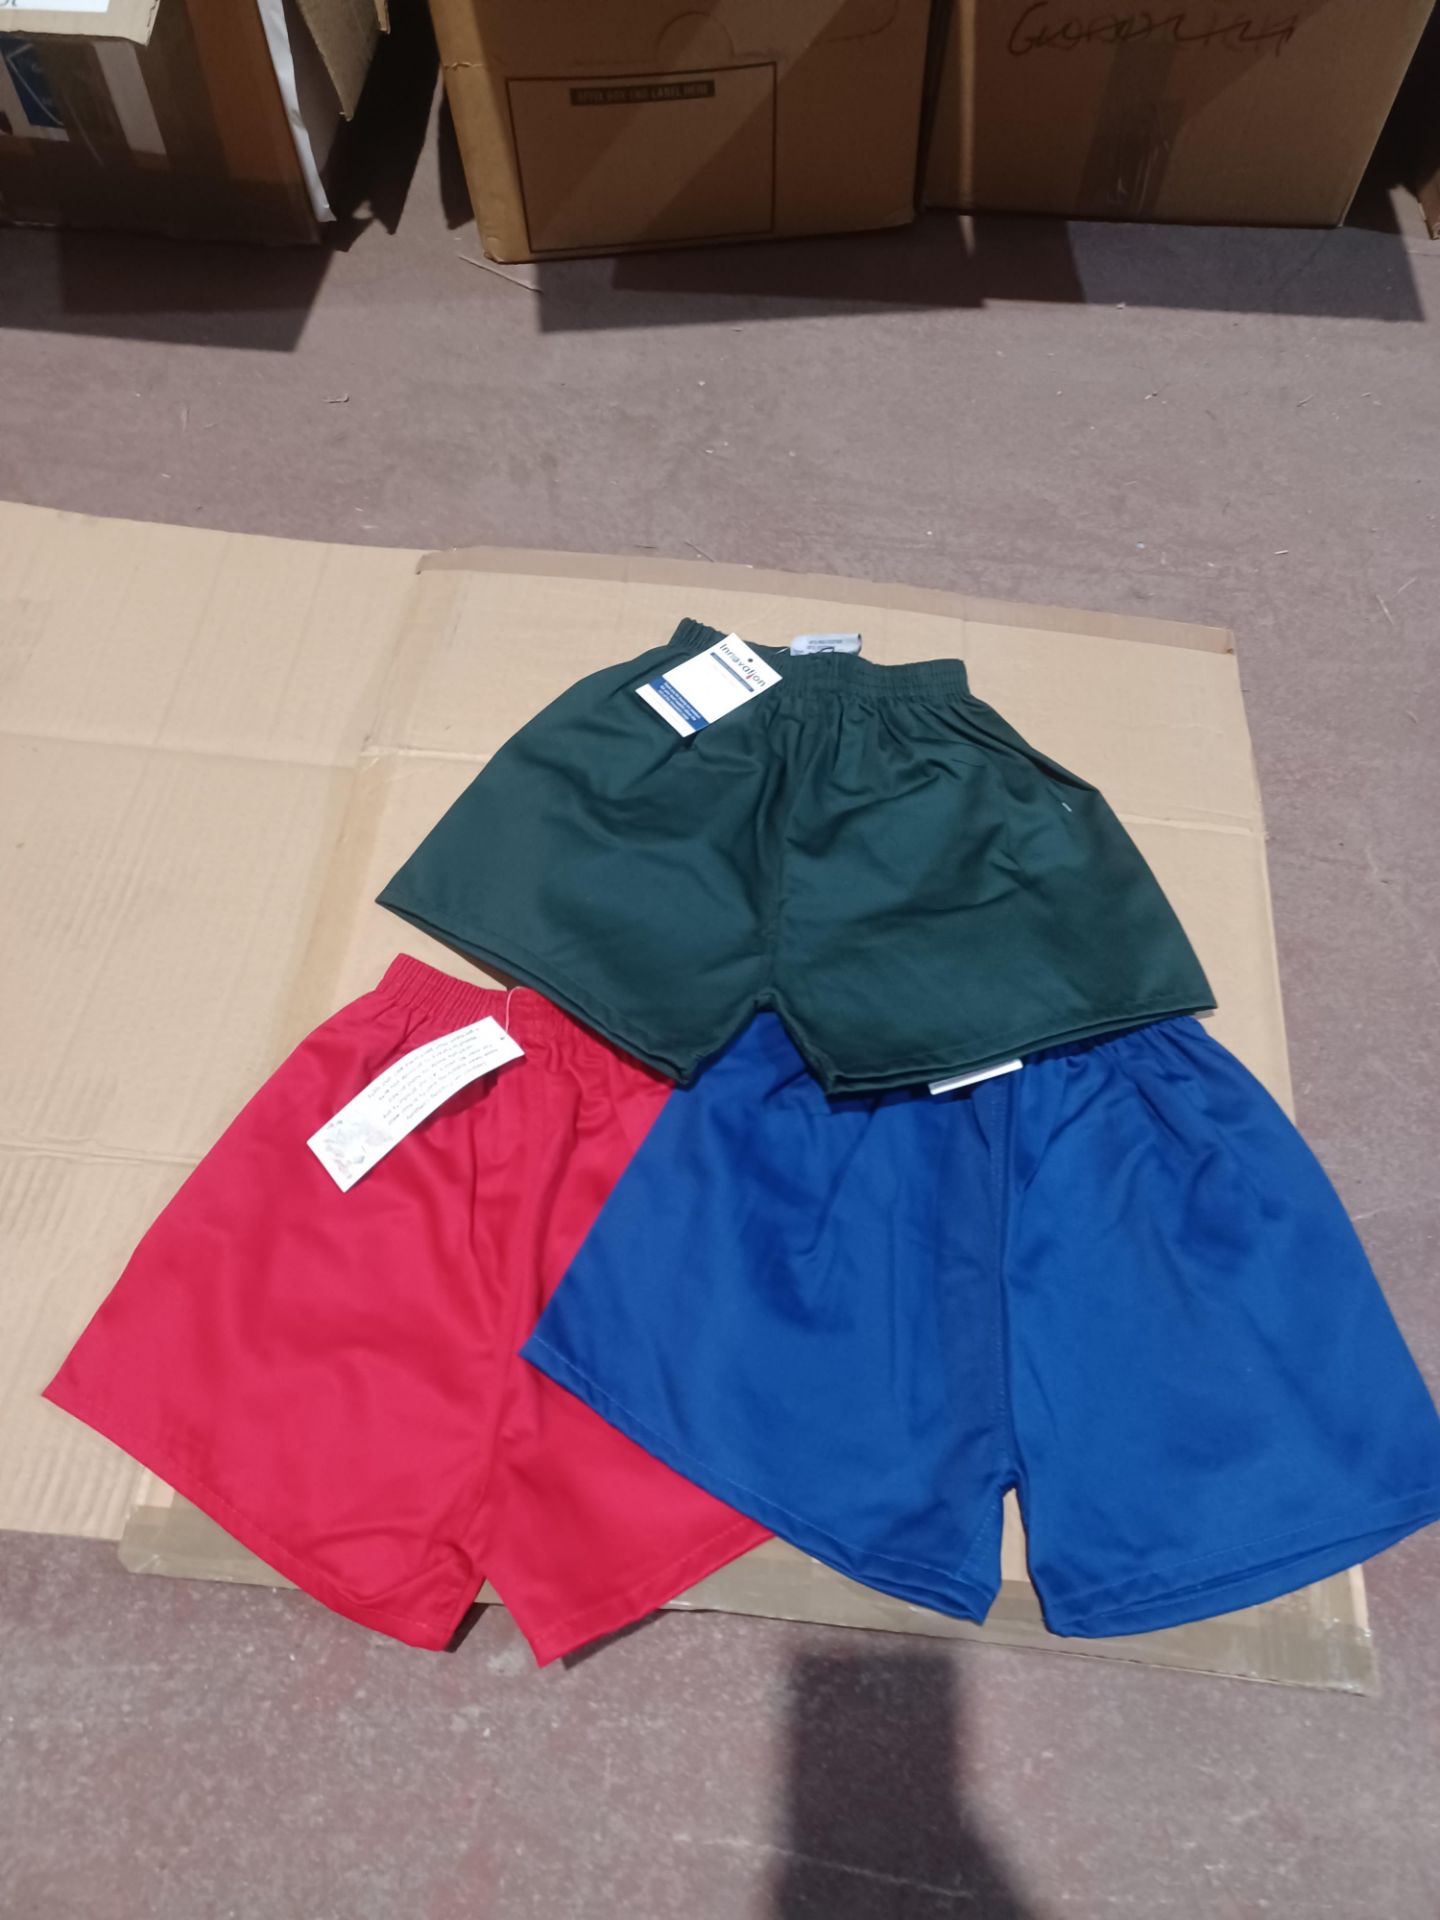 108 x Packaged Innovation Cotton Shorts in Various Sizes and Colours. RRP £12.12 each - R14 - Image 2 of 2